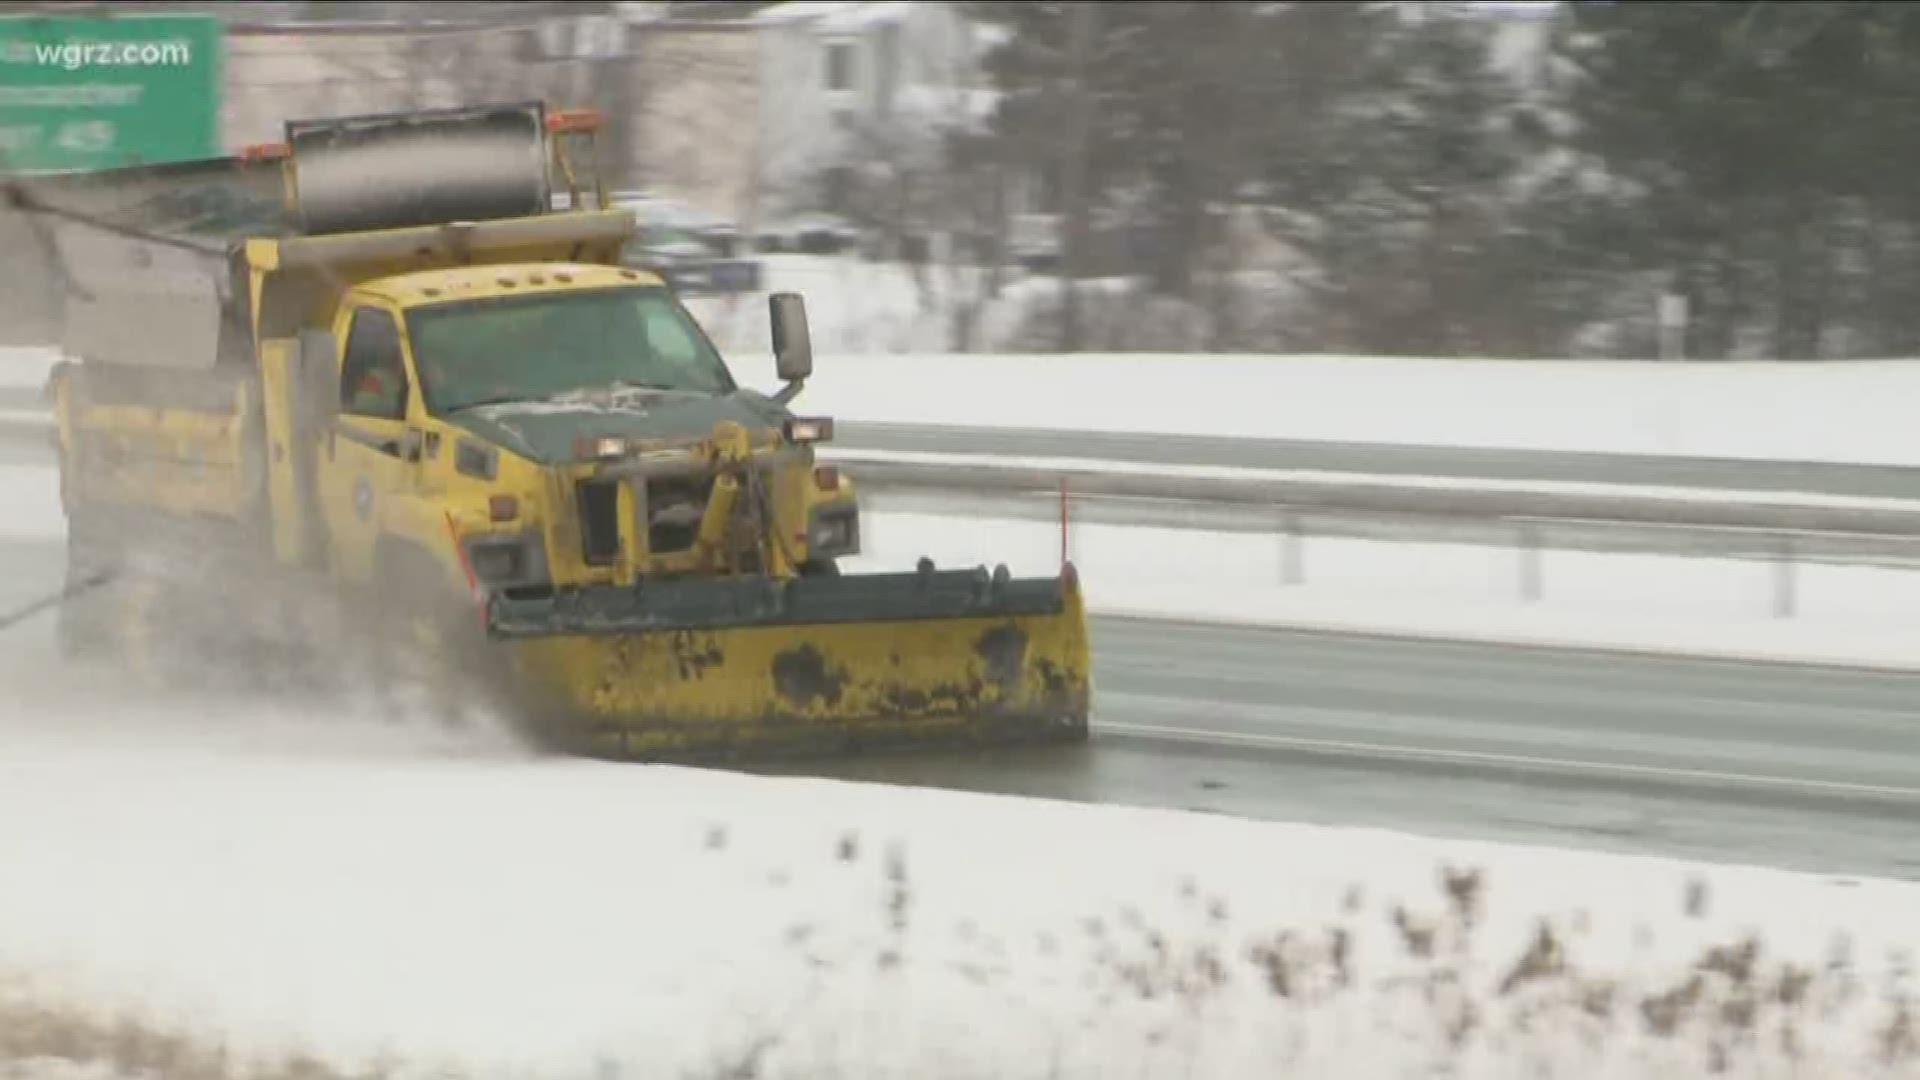 The Buffalo commissioner of public works says city officials are not concerned about having to pull plows from the roads due to visibility issues.